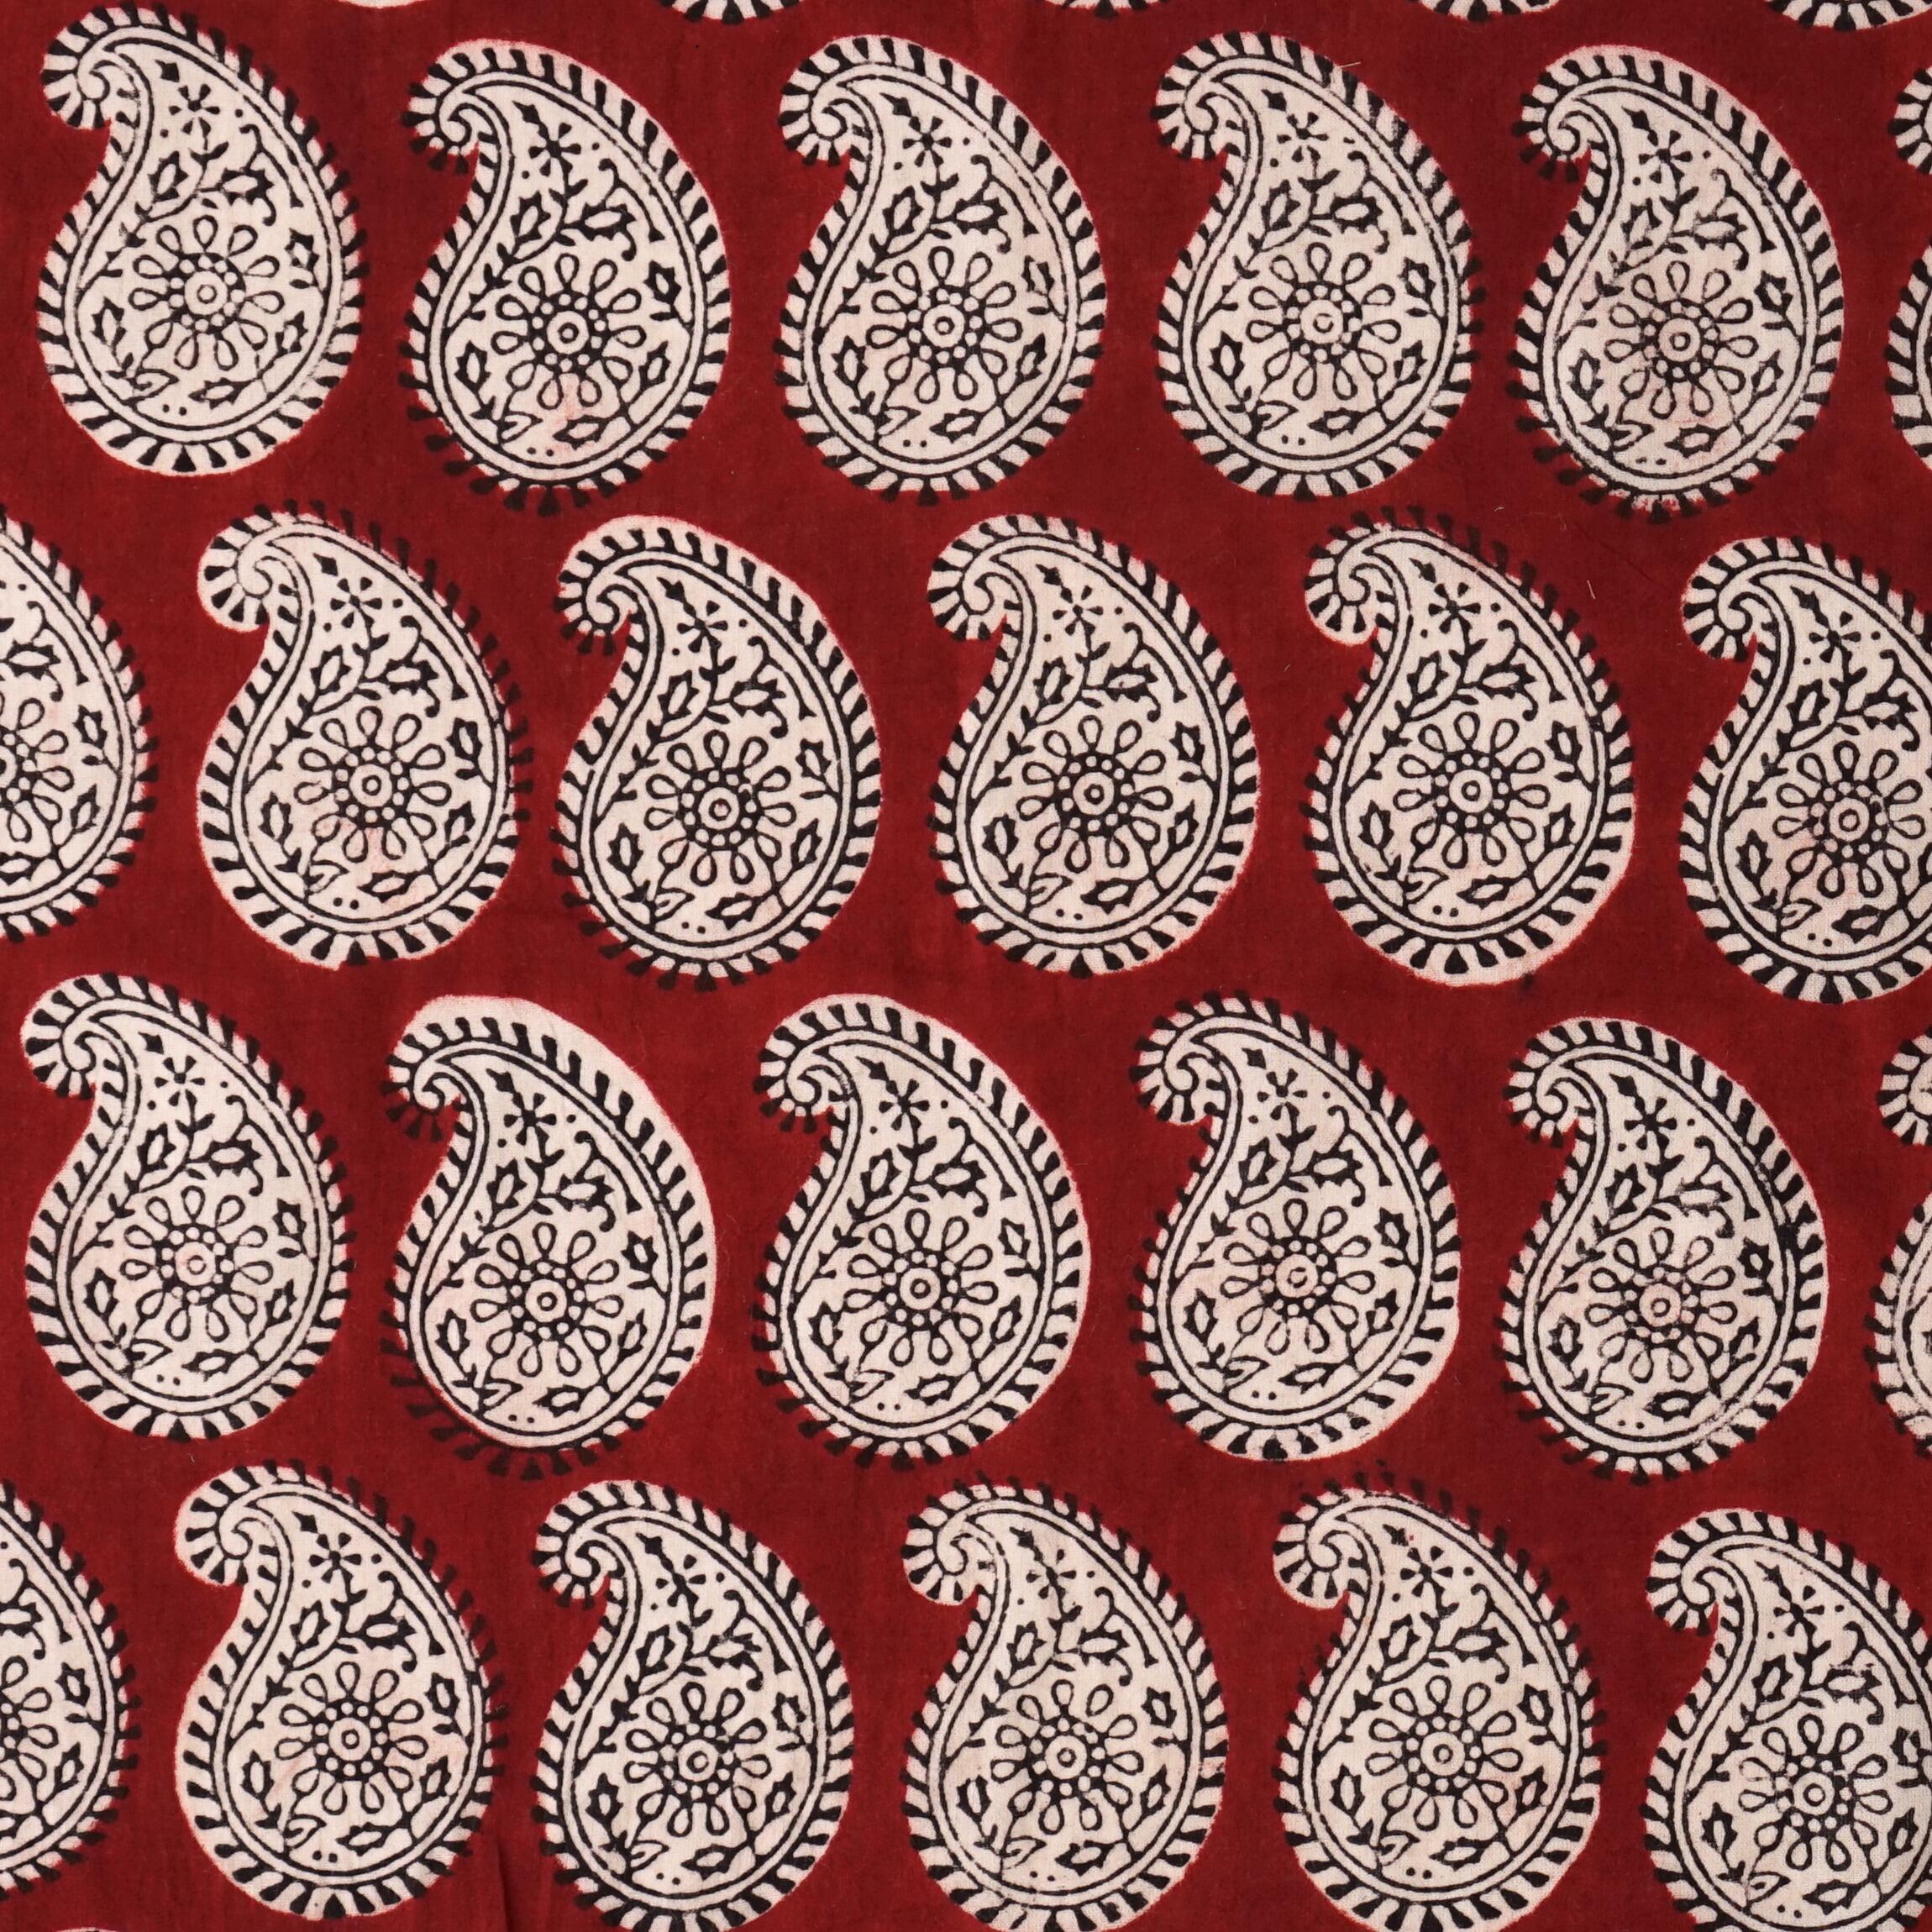 100% Block-Printed Cotton Fabric From India- Bagh - Alizarin Red Paisley Print - Flat